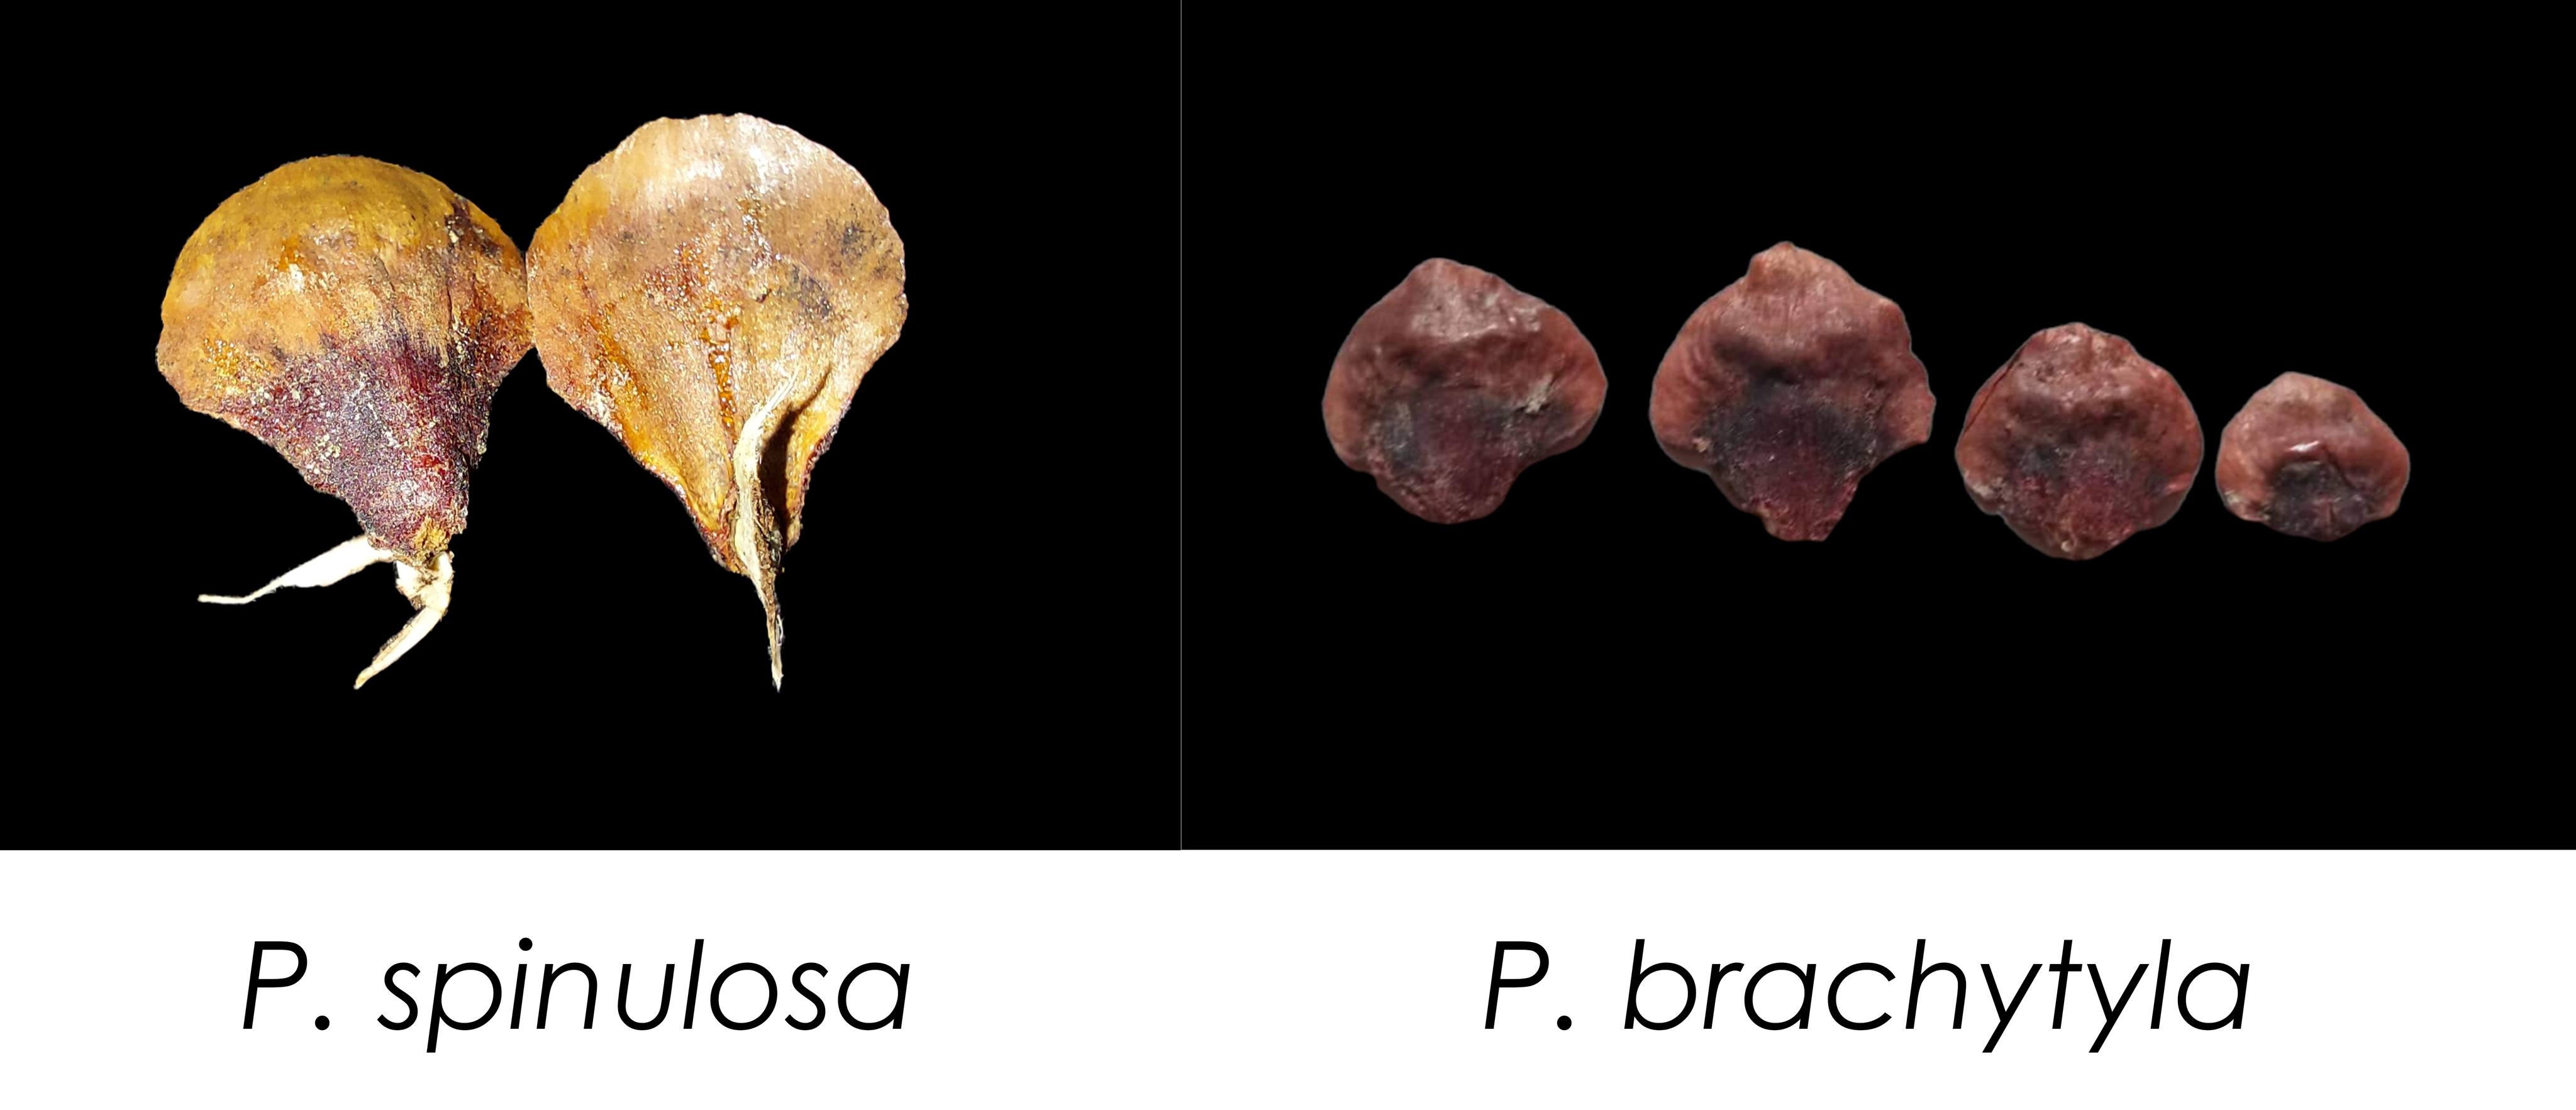 Comparision of the female cone scales of the two species of Picea